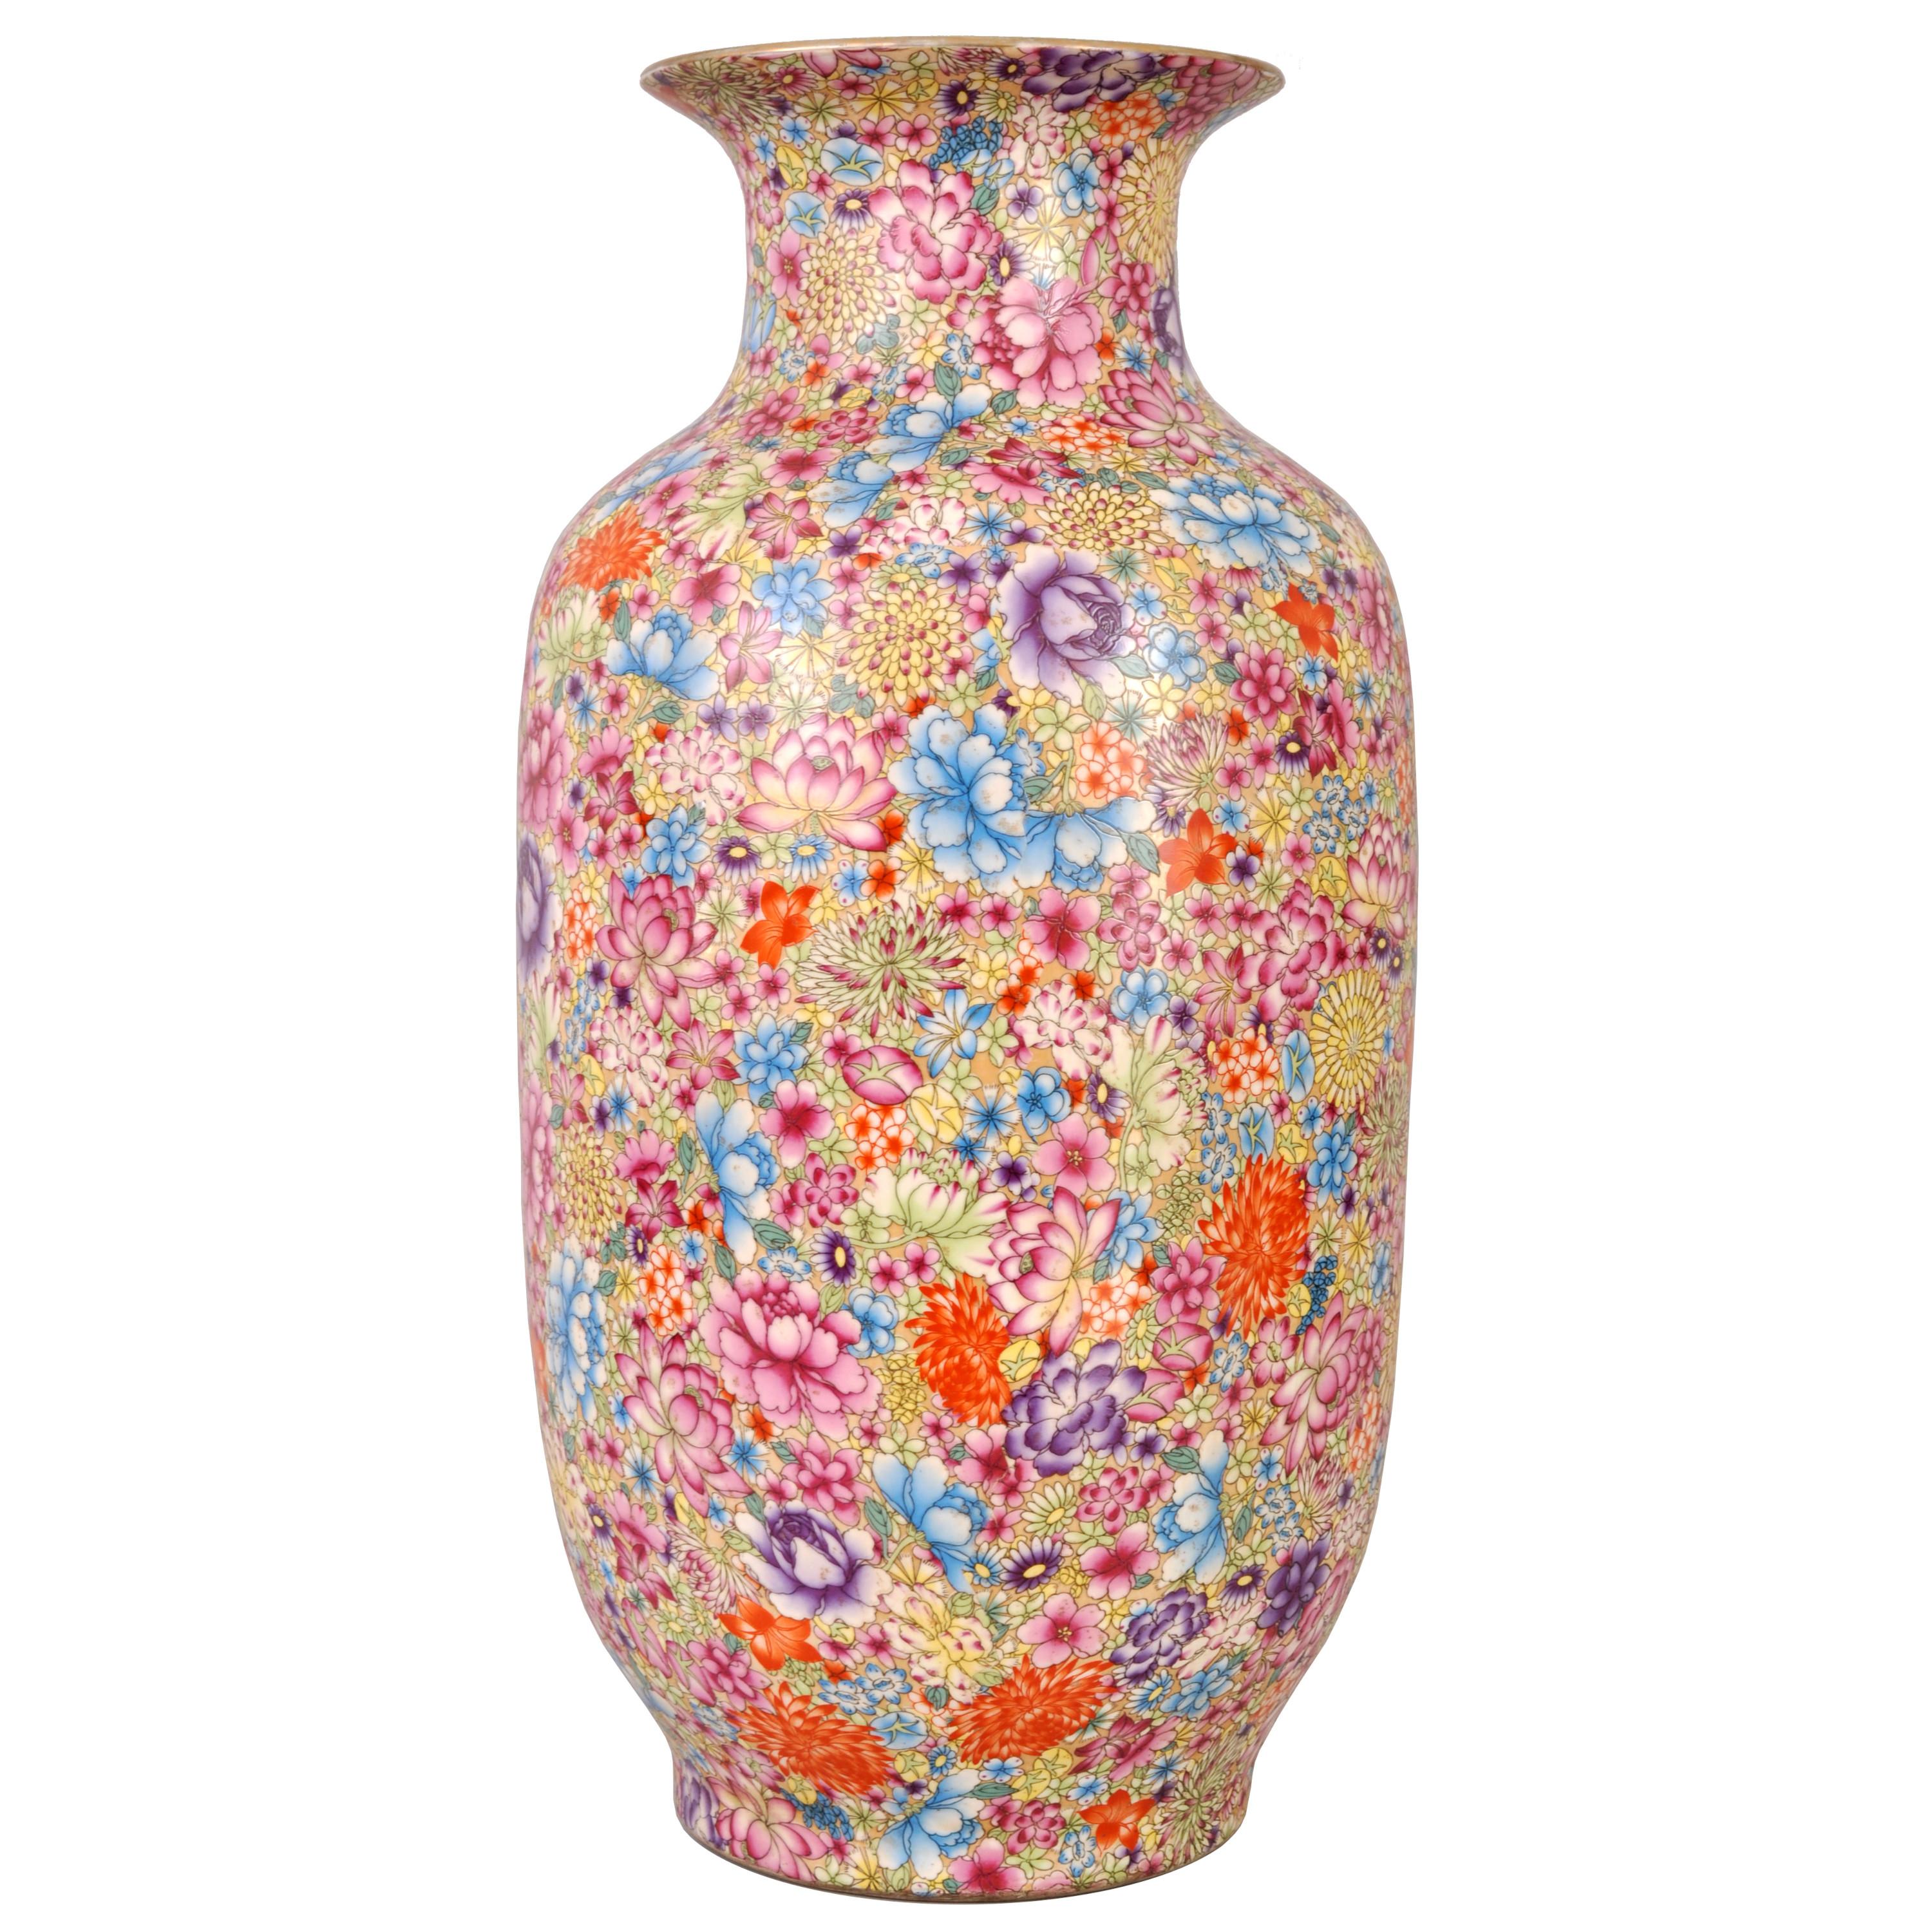 A monumental antique Chinese 'Thousand Flowers' Qing Dynasty (1644-1912) porcelain vase, circa 1900. The vase of significant proportions at 24